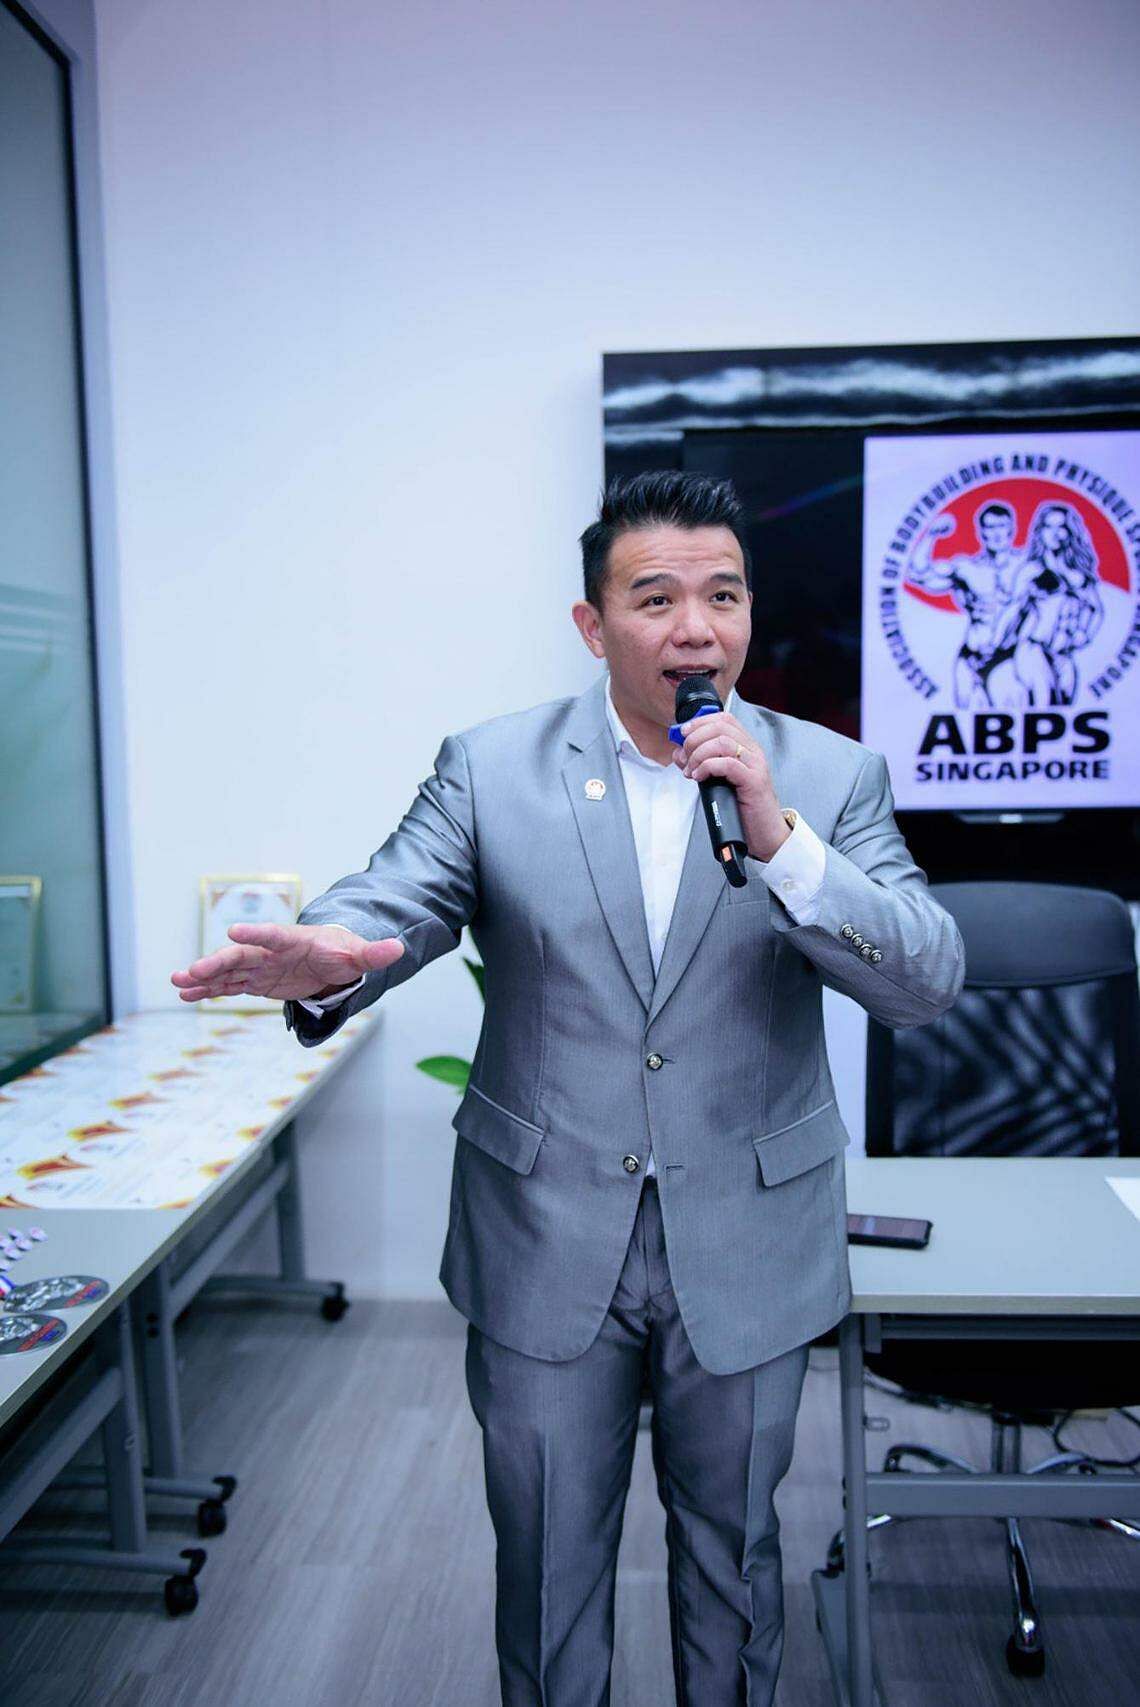 Bodybuilding body aims to become national sports association to uplift sport in S’pore